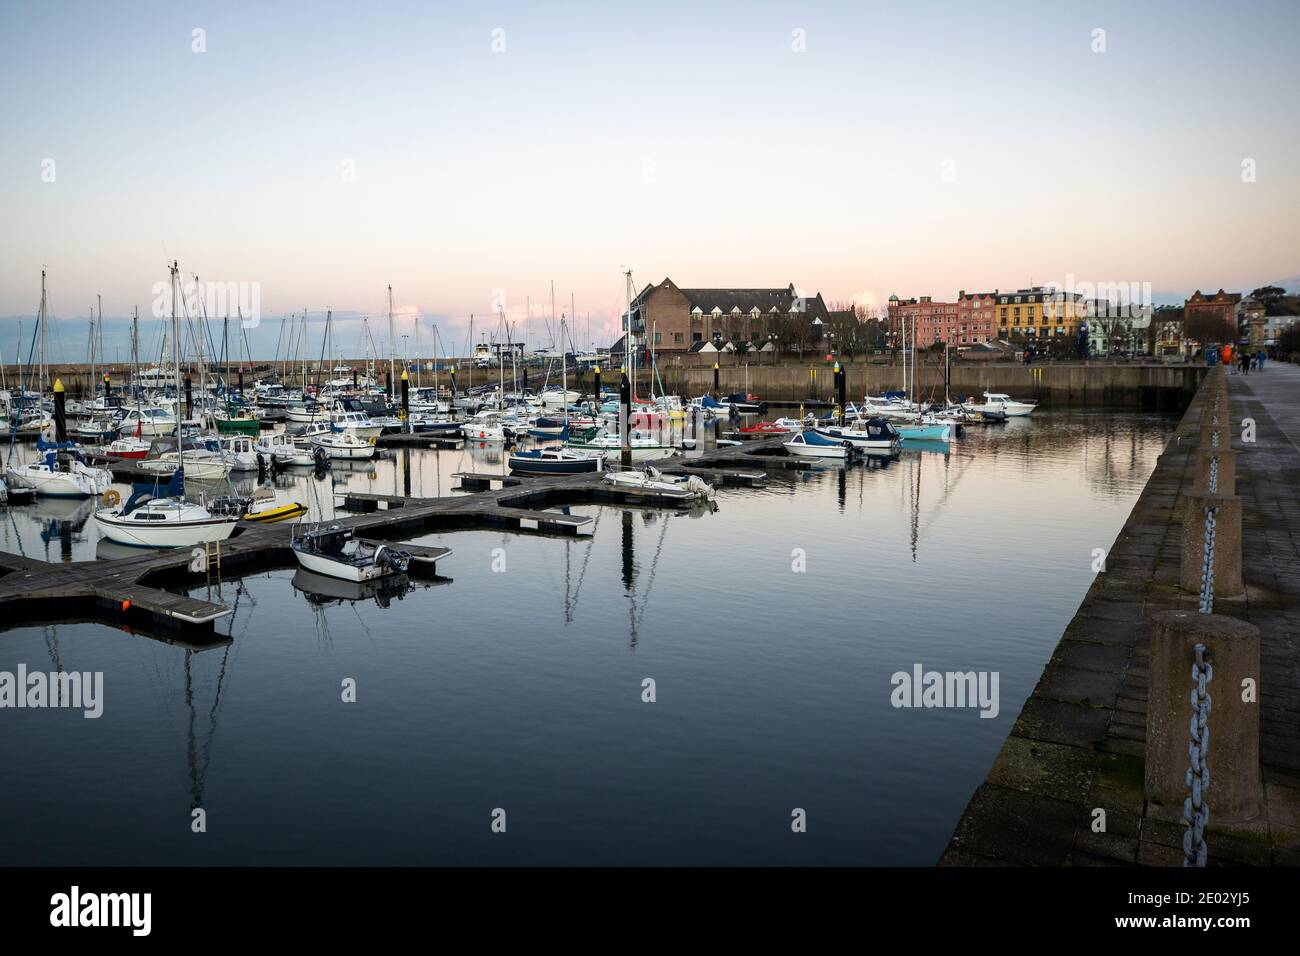 Bangor Marina in Northern Ireland. Potential sightings of UFOs, including a man who said he had been delivered to Bangor Marina by extraterrestrials, were made to the PSNI this year. Stock Photo